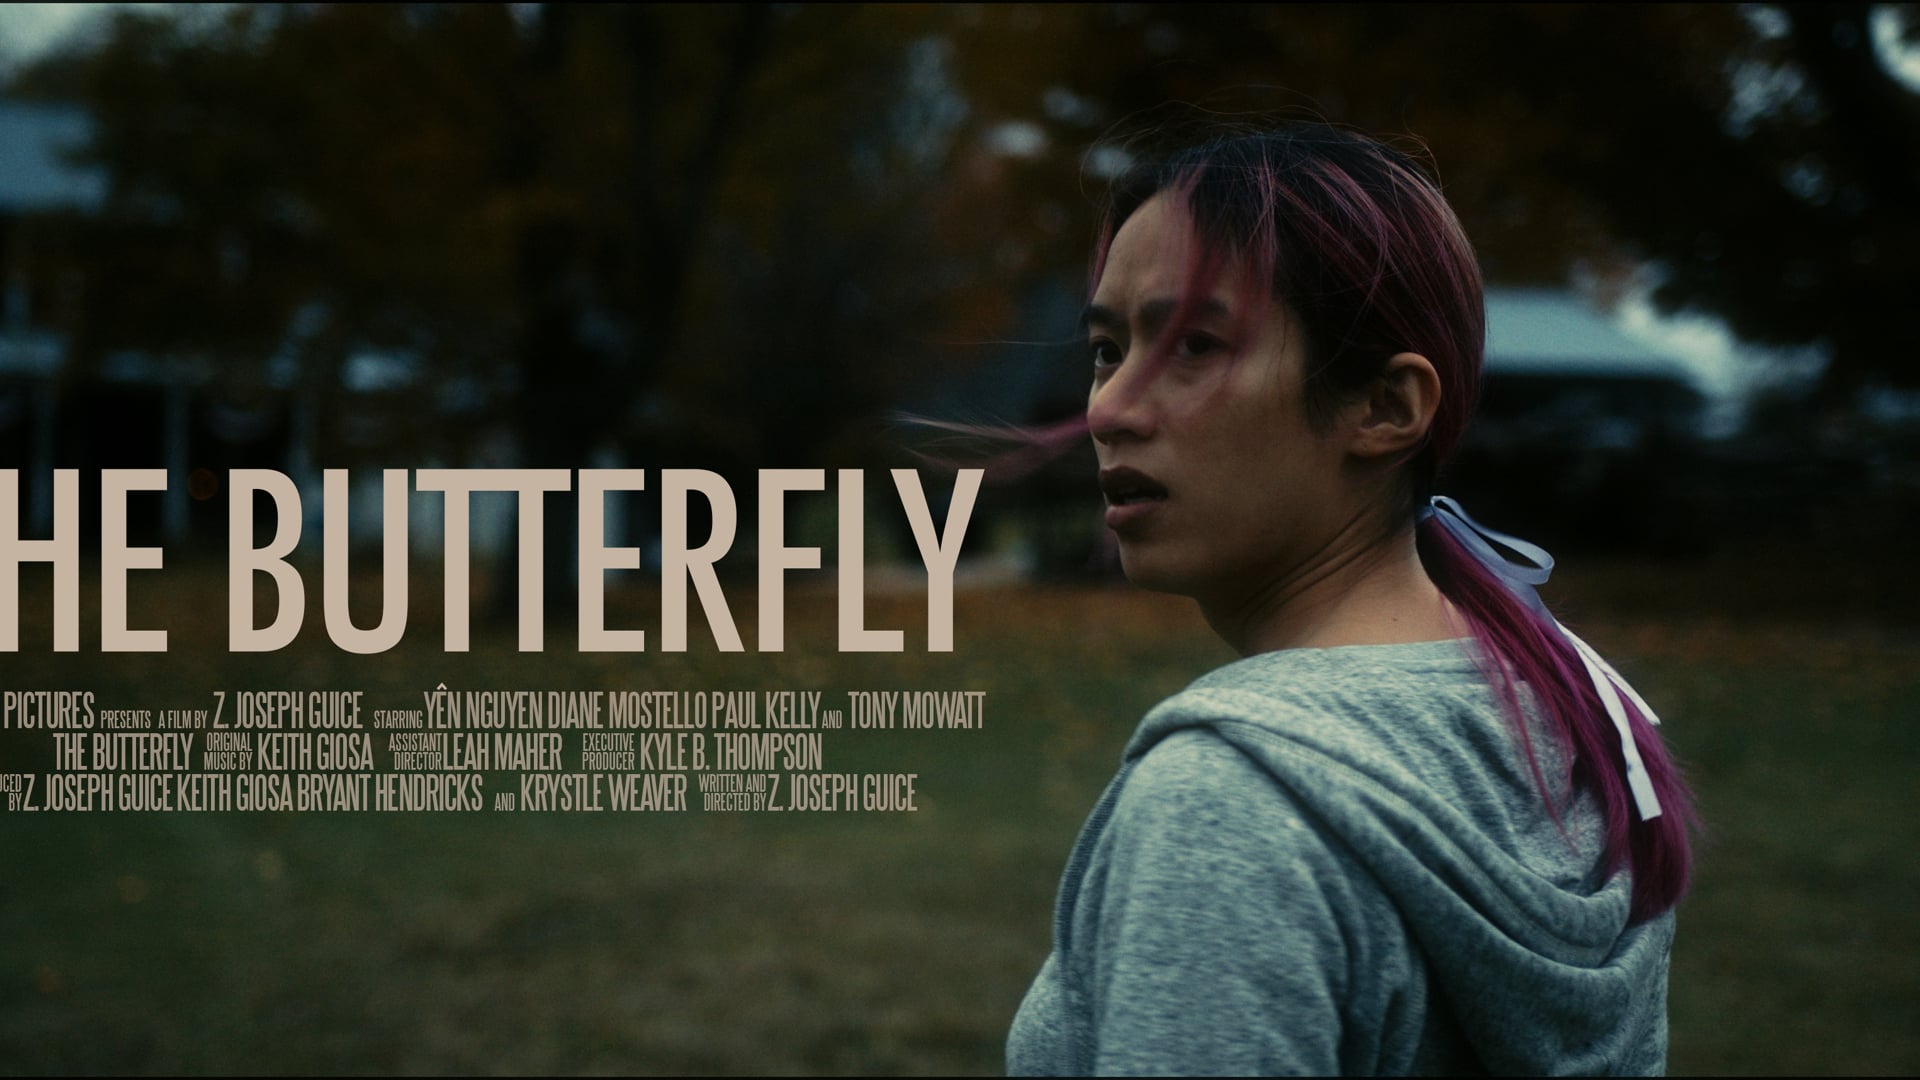 The Butterfly - Trailer